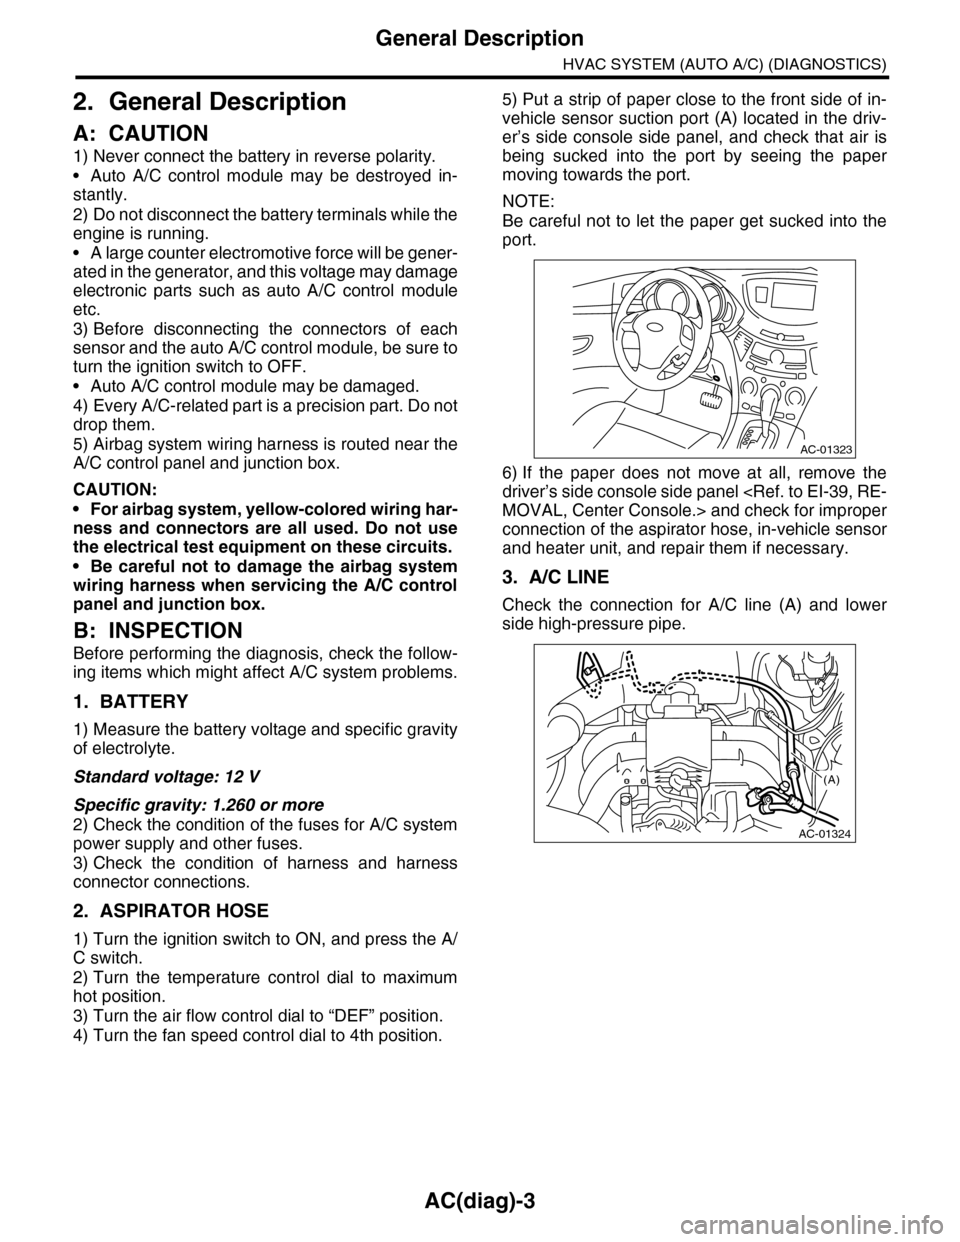 SUBARU TRIBECA 2009 1.G Service Manual PDF AC(diag)-3
General Description
HVAC SYSTEM (AUTO A/C) (DIAGNOSTICS)
2. General Description
A: CAUTION
1) Never connect the battery in reverse polarity.
•Auto A/C control module may be destroyed in-
